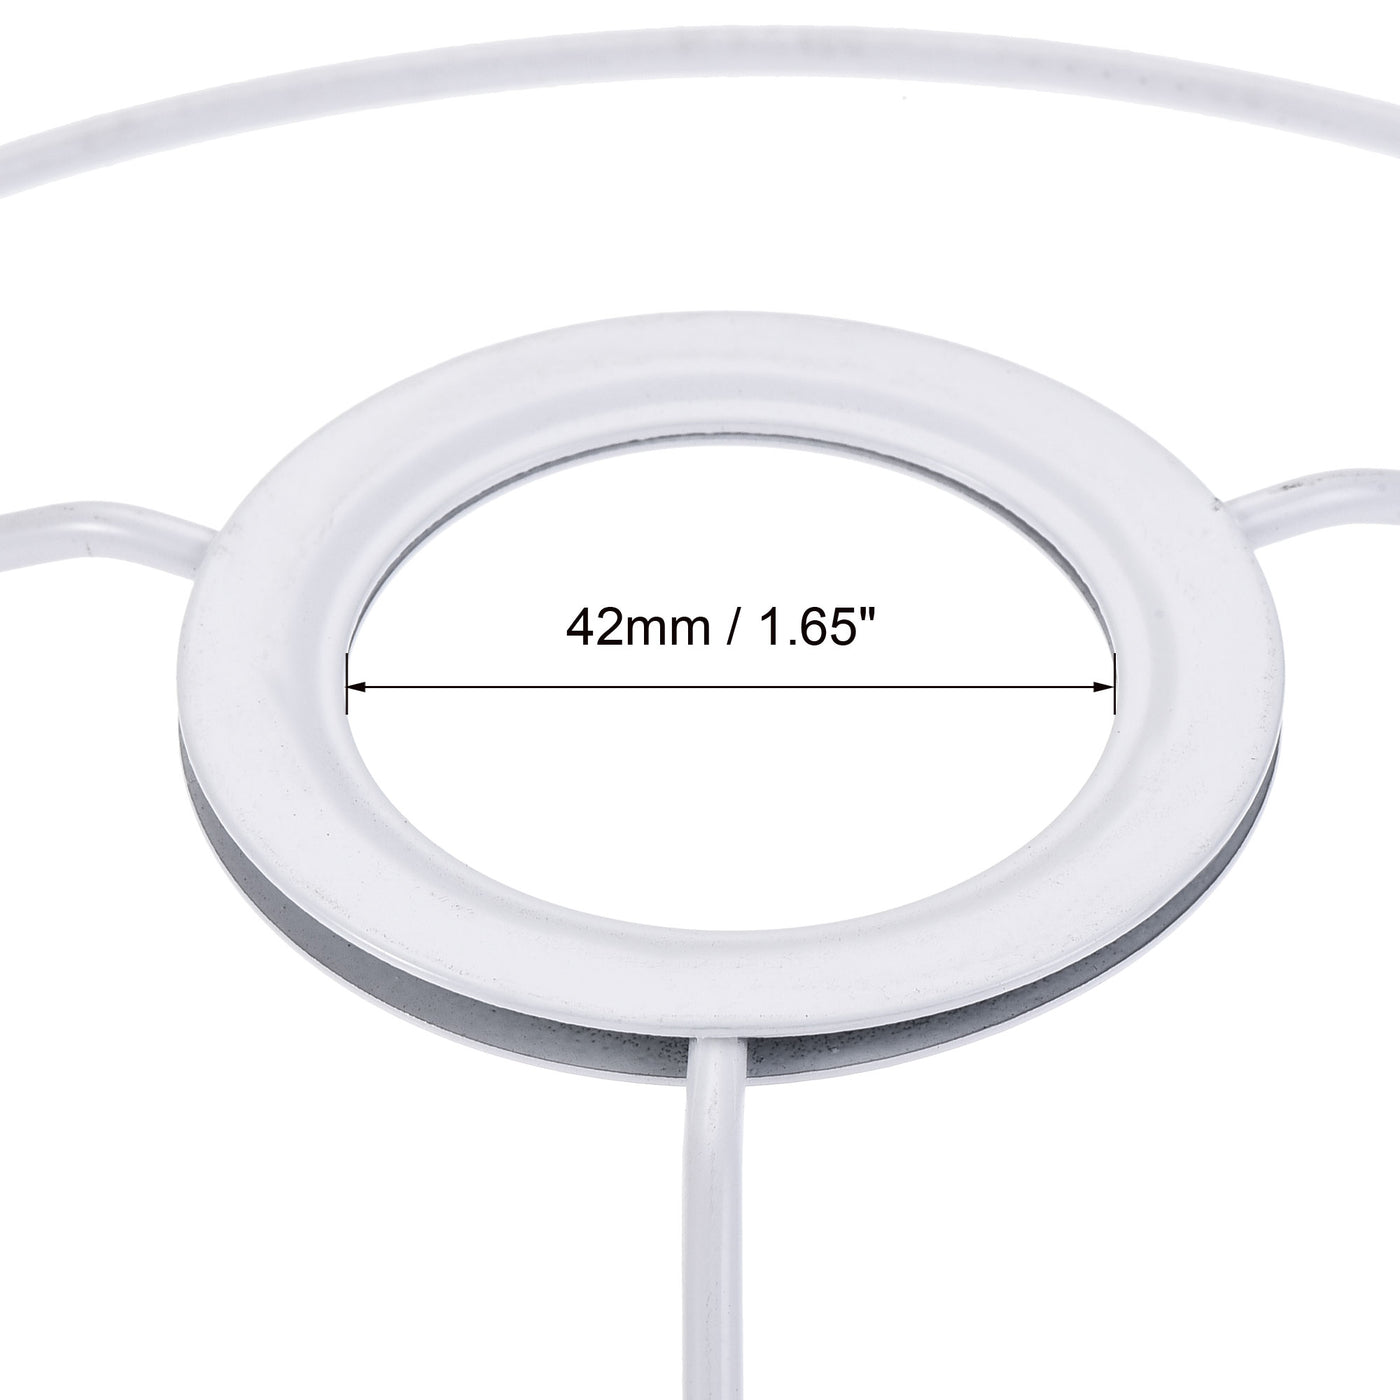 uxcell Uxcell Lamp Shade Ring, 200mm Dia. Lampshade Holder Frame Ring for E26/E27 Lamp Socket, Baked Coating Iron 1 Set